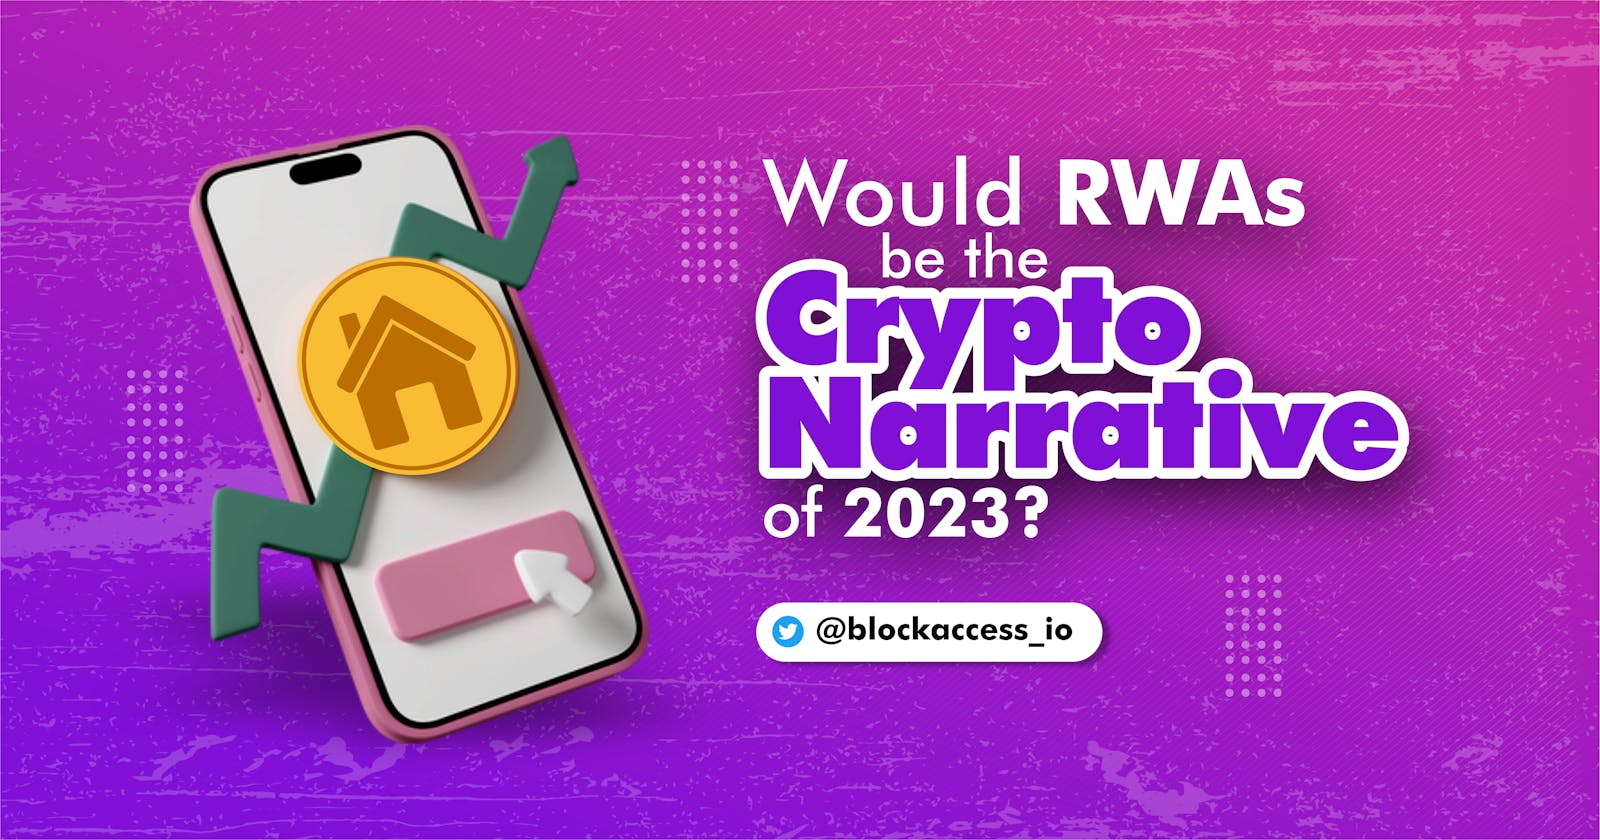 WOULD RWAs BE THE CRYPTO NARRATIVE OF 2023?